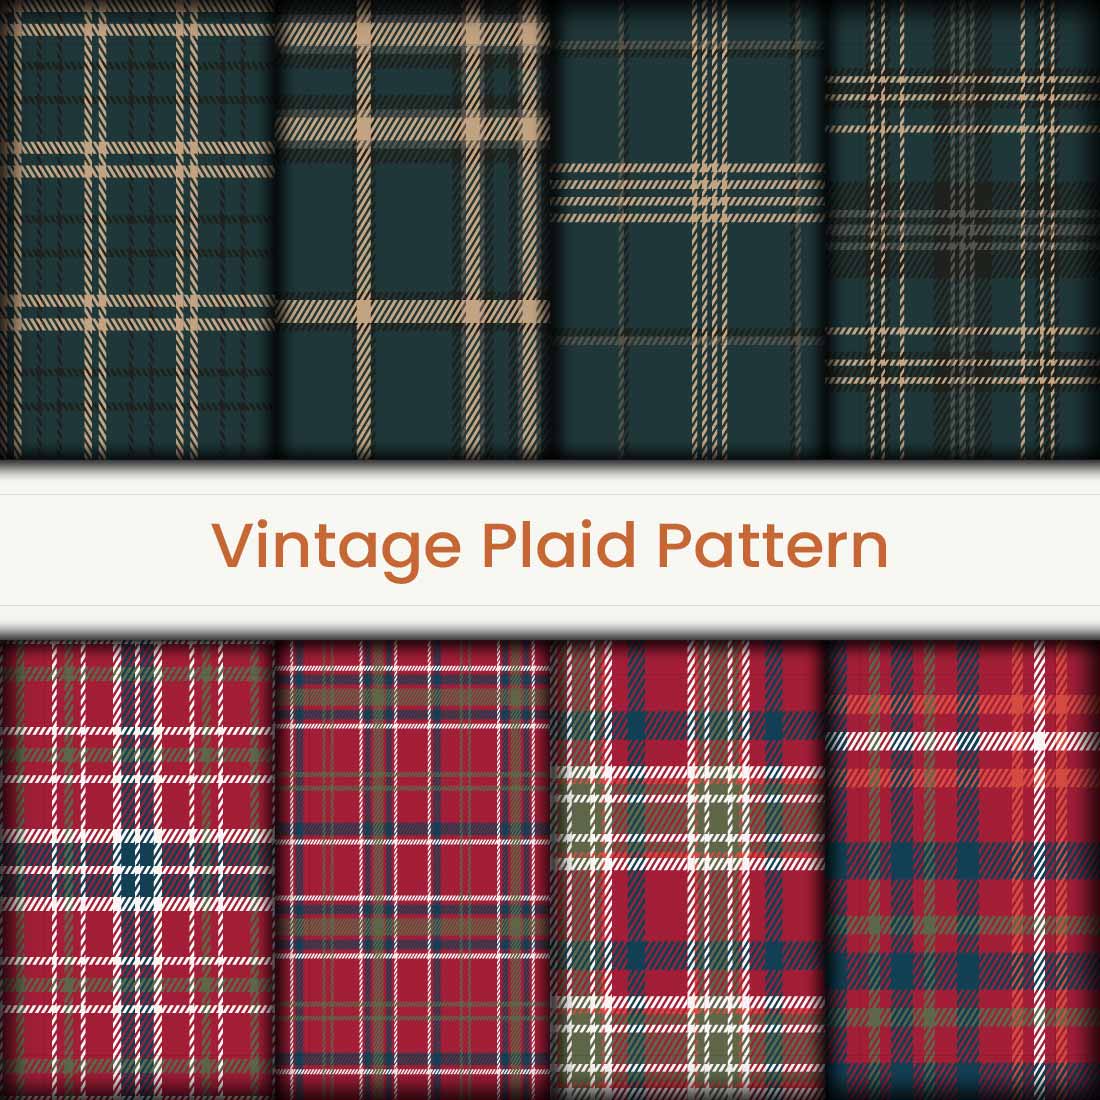 Tartan plaid pattern vector illustration set texture for clothing fabric prints only $8 pinterest preview image.